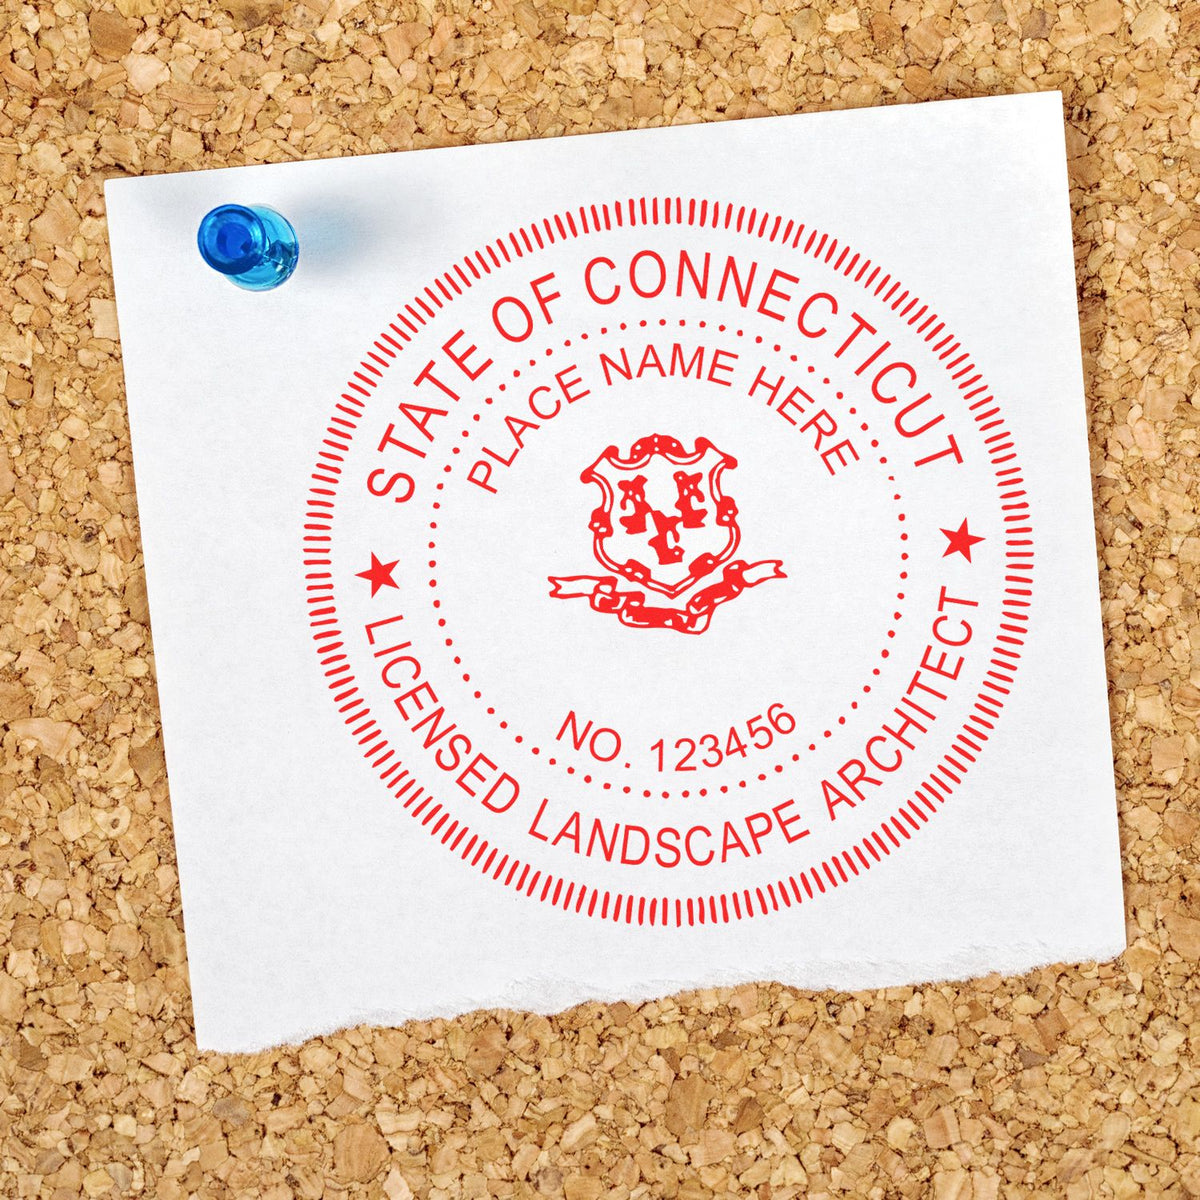 The Connecticut Landscape Architectural Seal Stamp stamp impression comes to life with a crisp, detailed photo on paper - showcasing true professional quality.